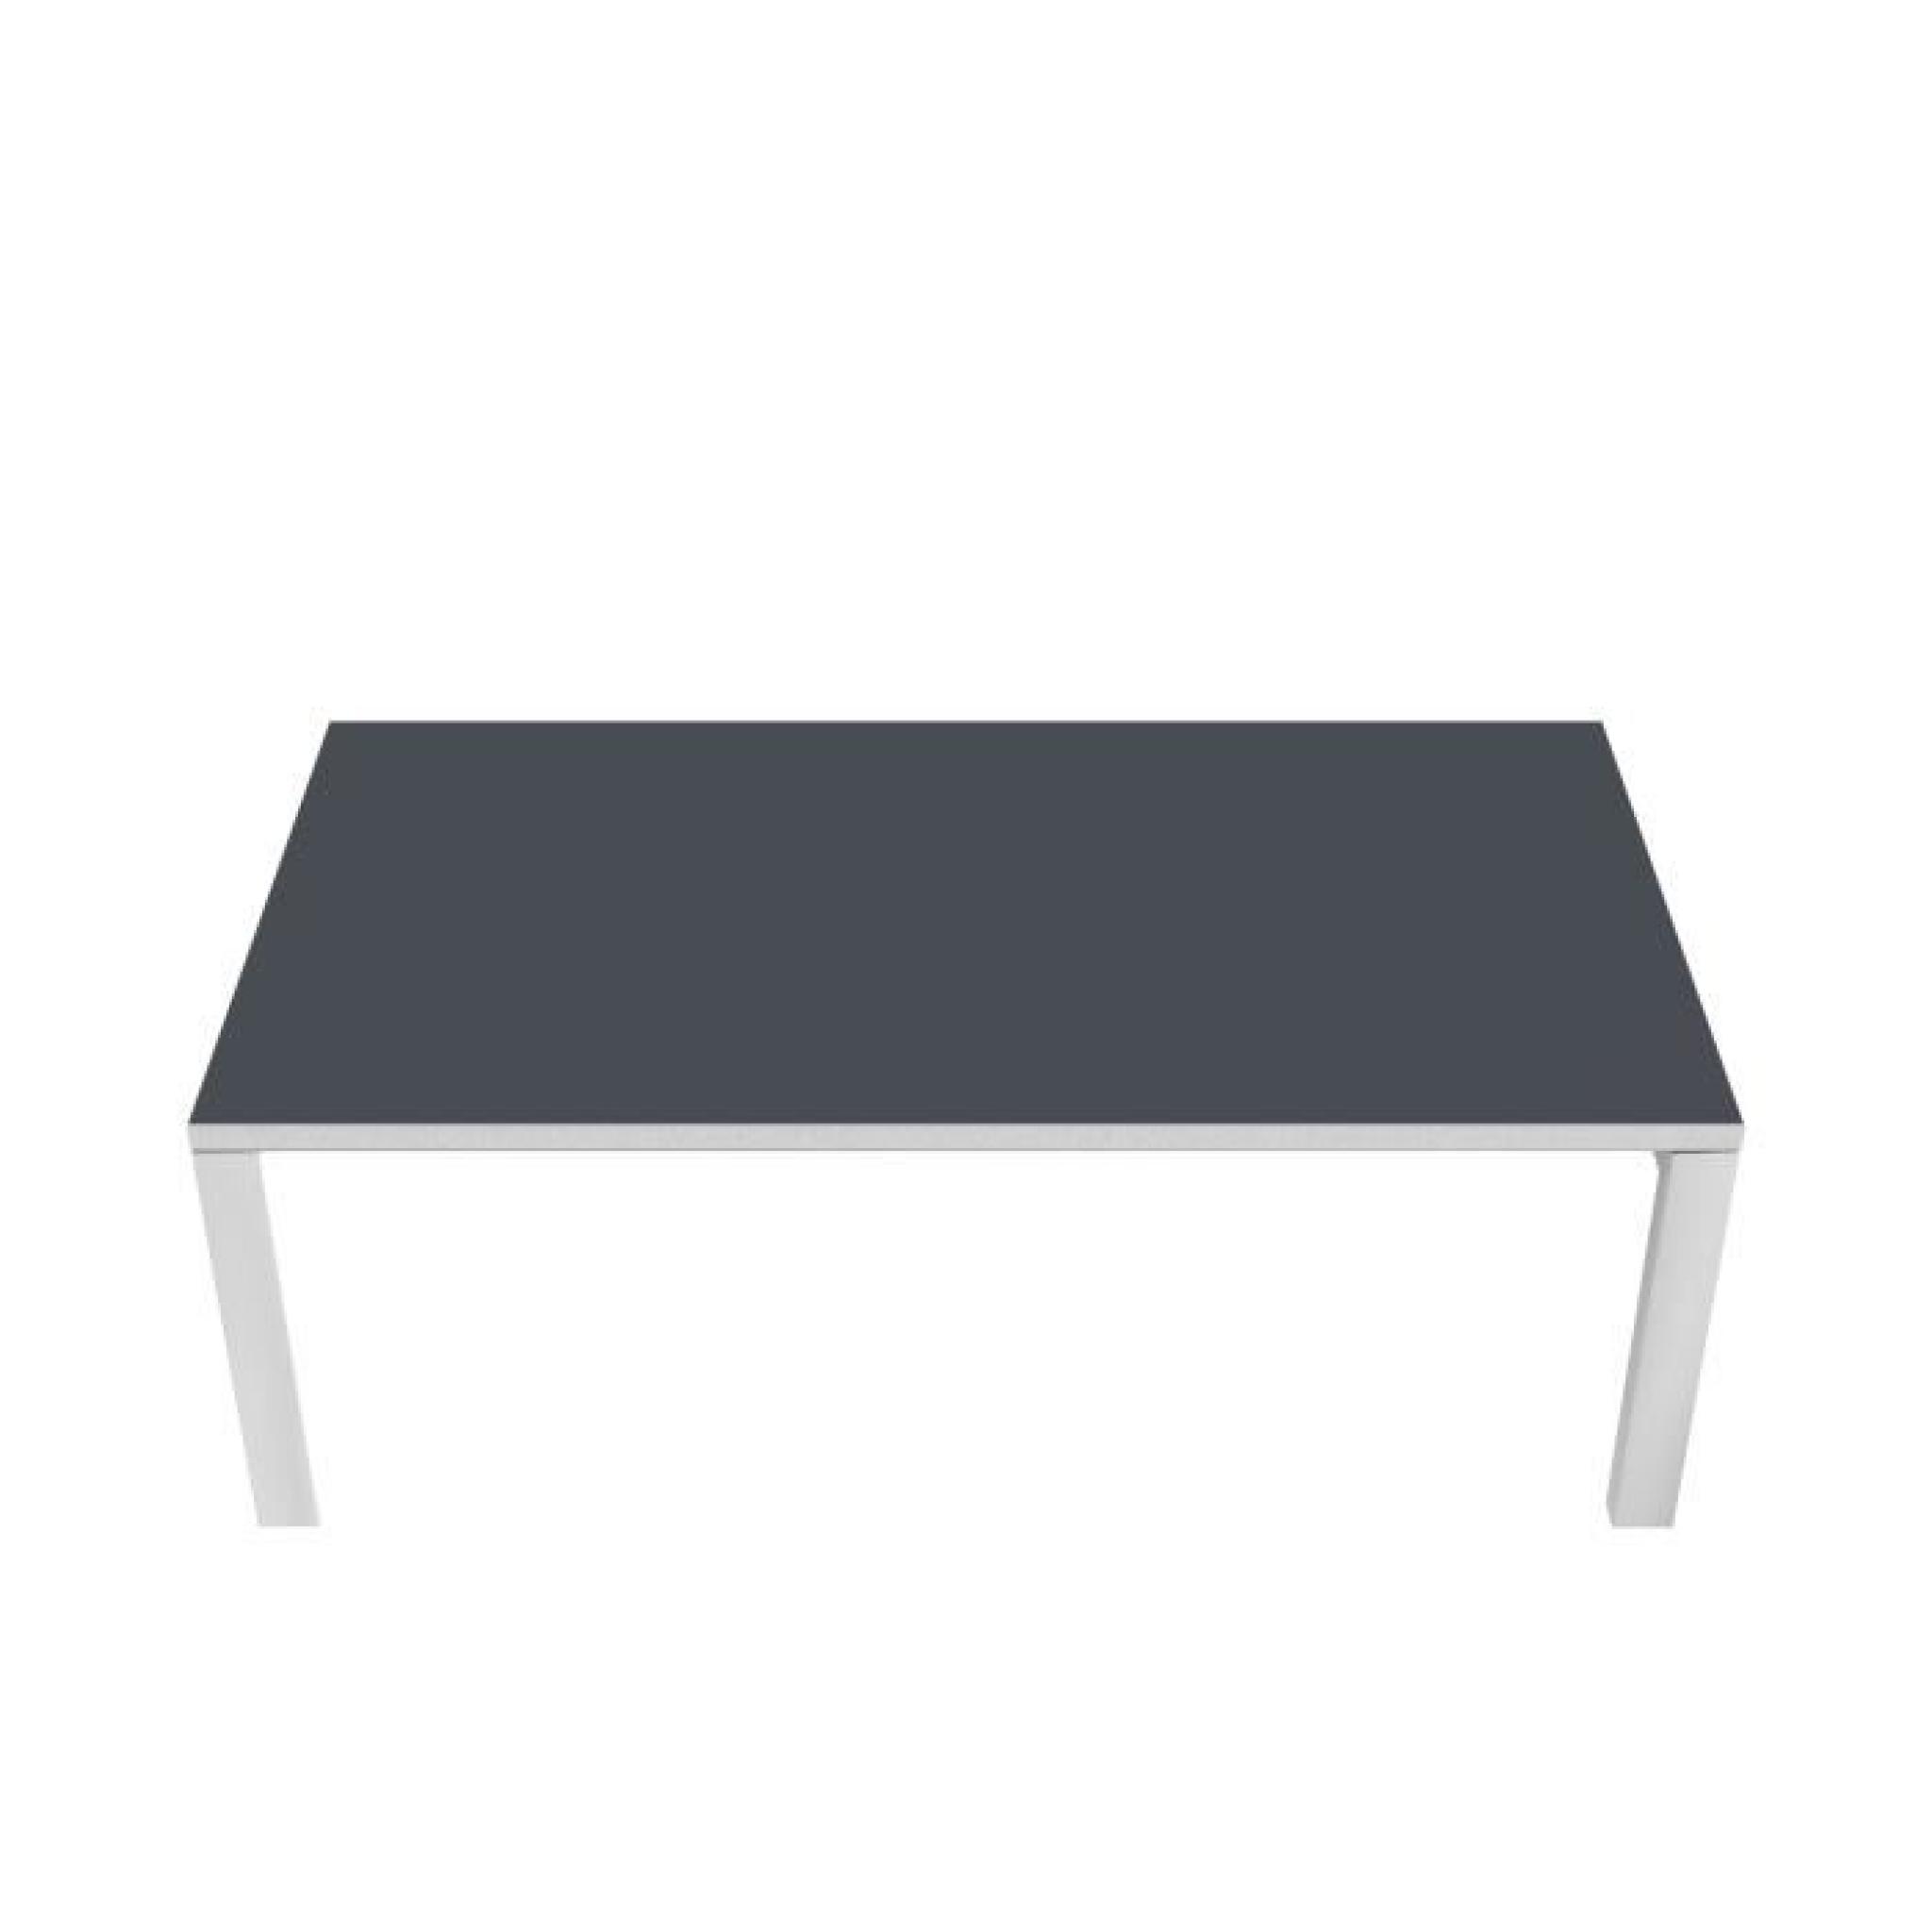 Table d'accueil design EasyWork ATYLIA Couleur Anthracite pas cher